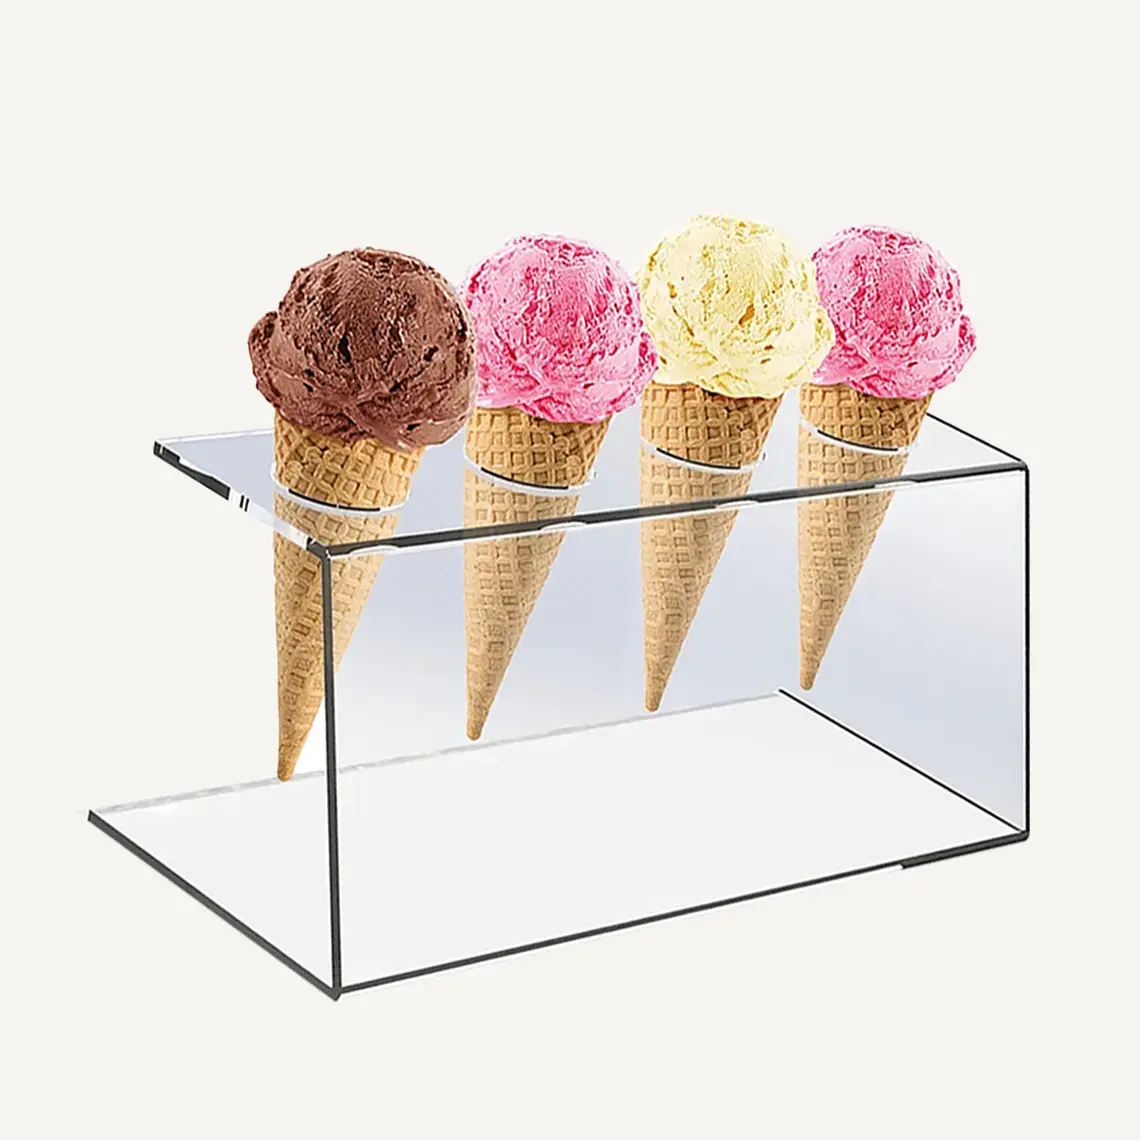 We make Box Design for Ice cream Cone Easier to Hold in your Hand